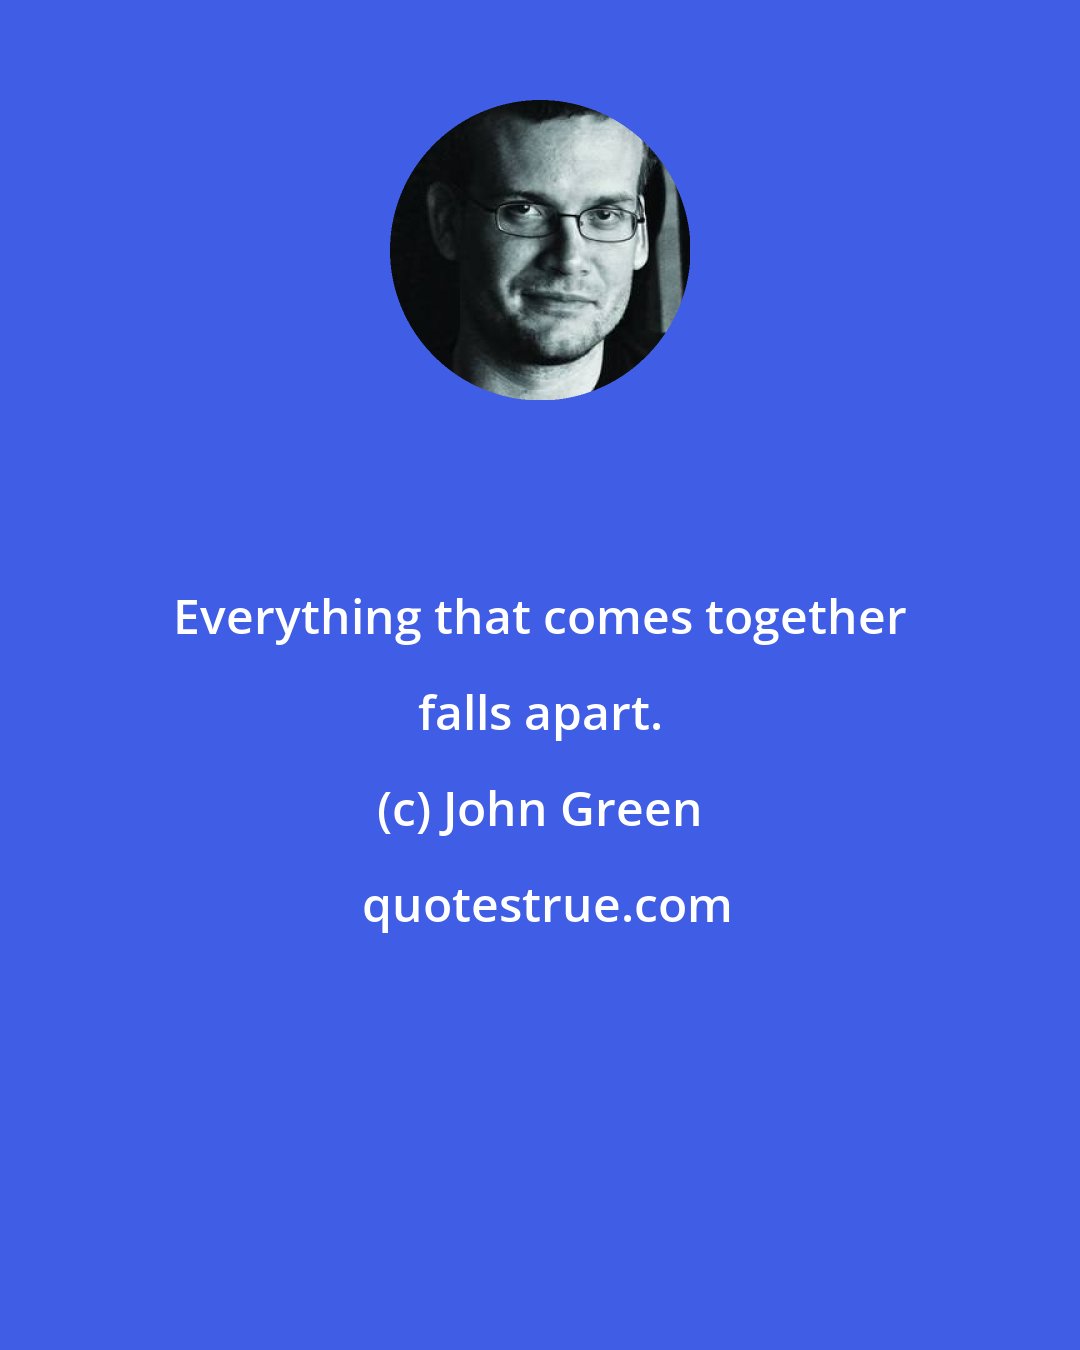 John Green: Everything that comes together falls apart.